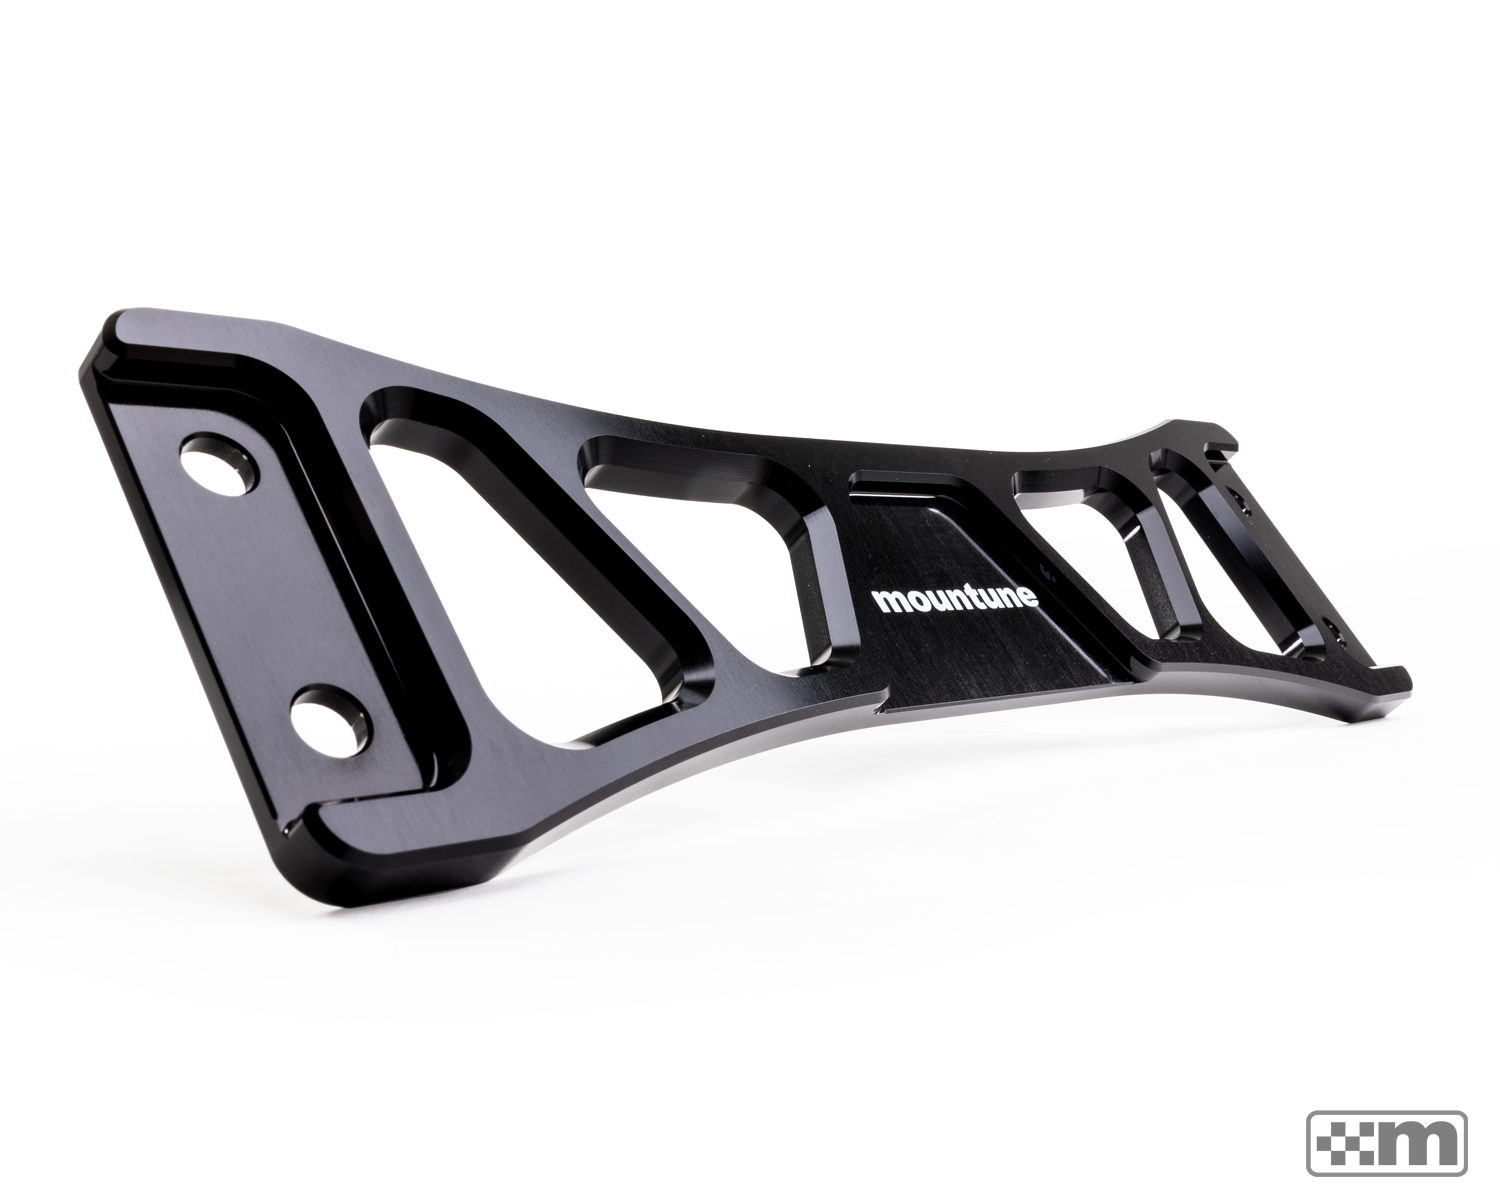 Transmission Tunnel Brace [Mk4 Focus] Chassis mountune   